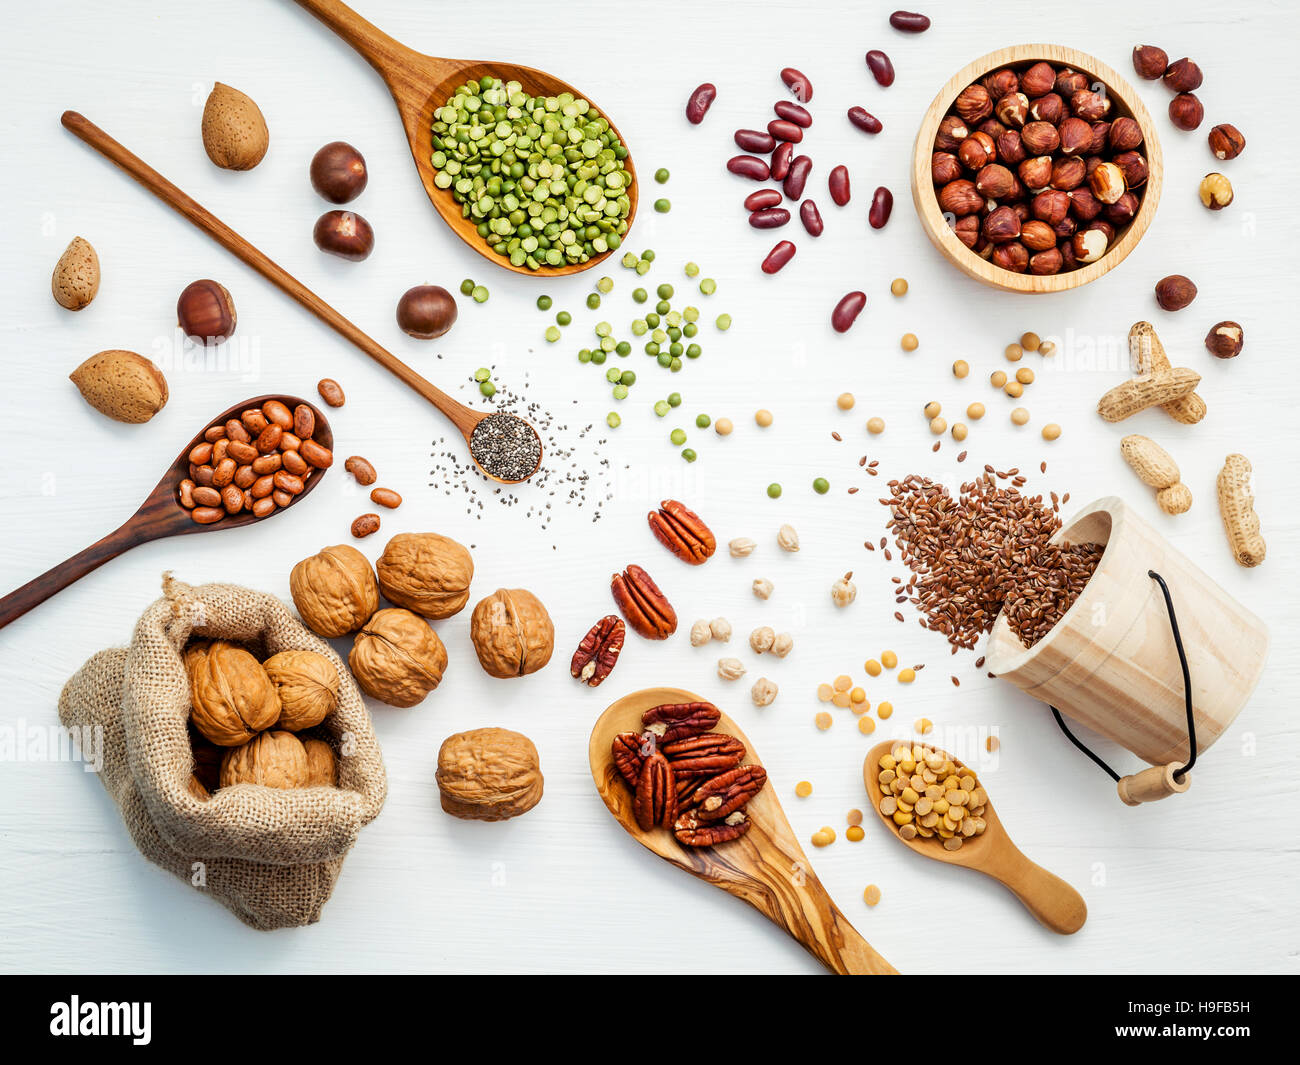 Bowls and spoons of various legumes and different kinds of nuts Stock Photo